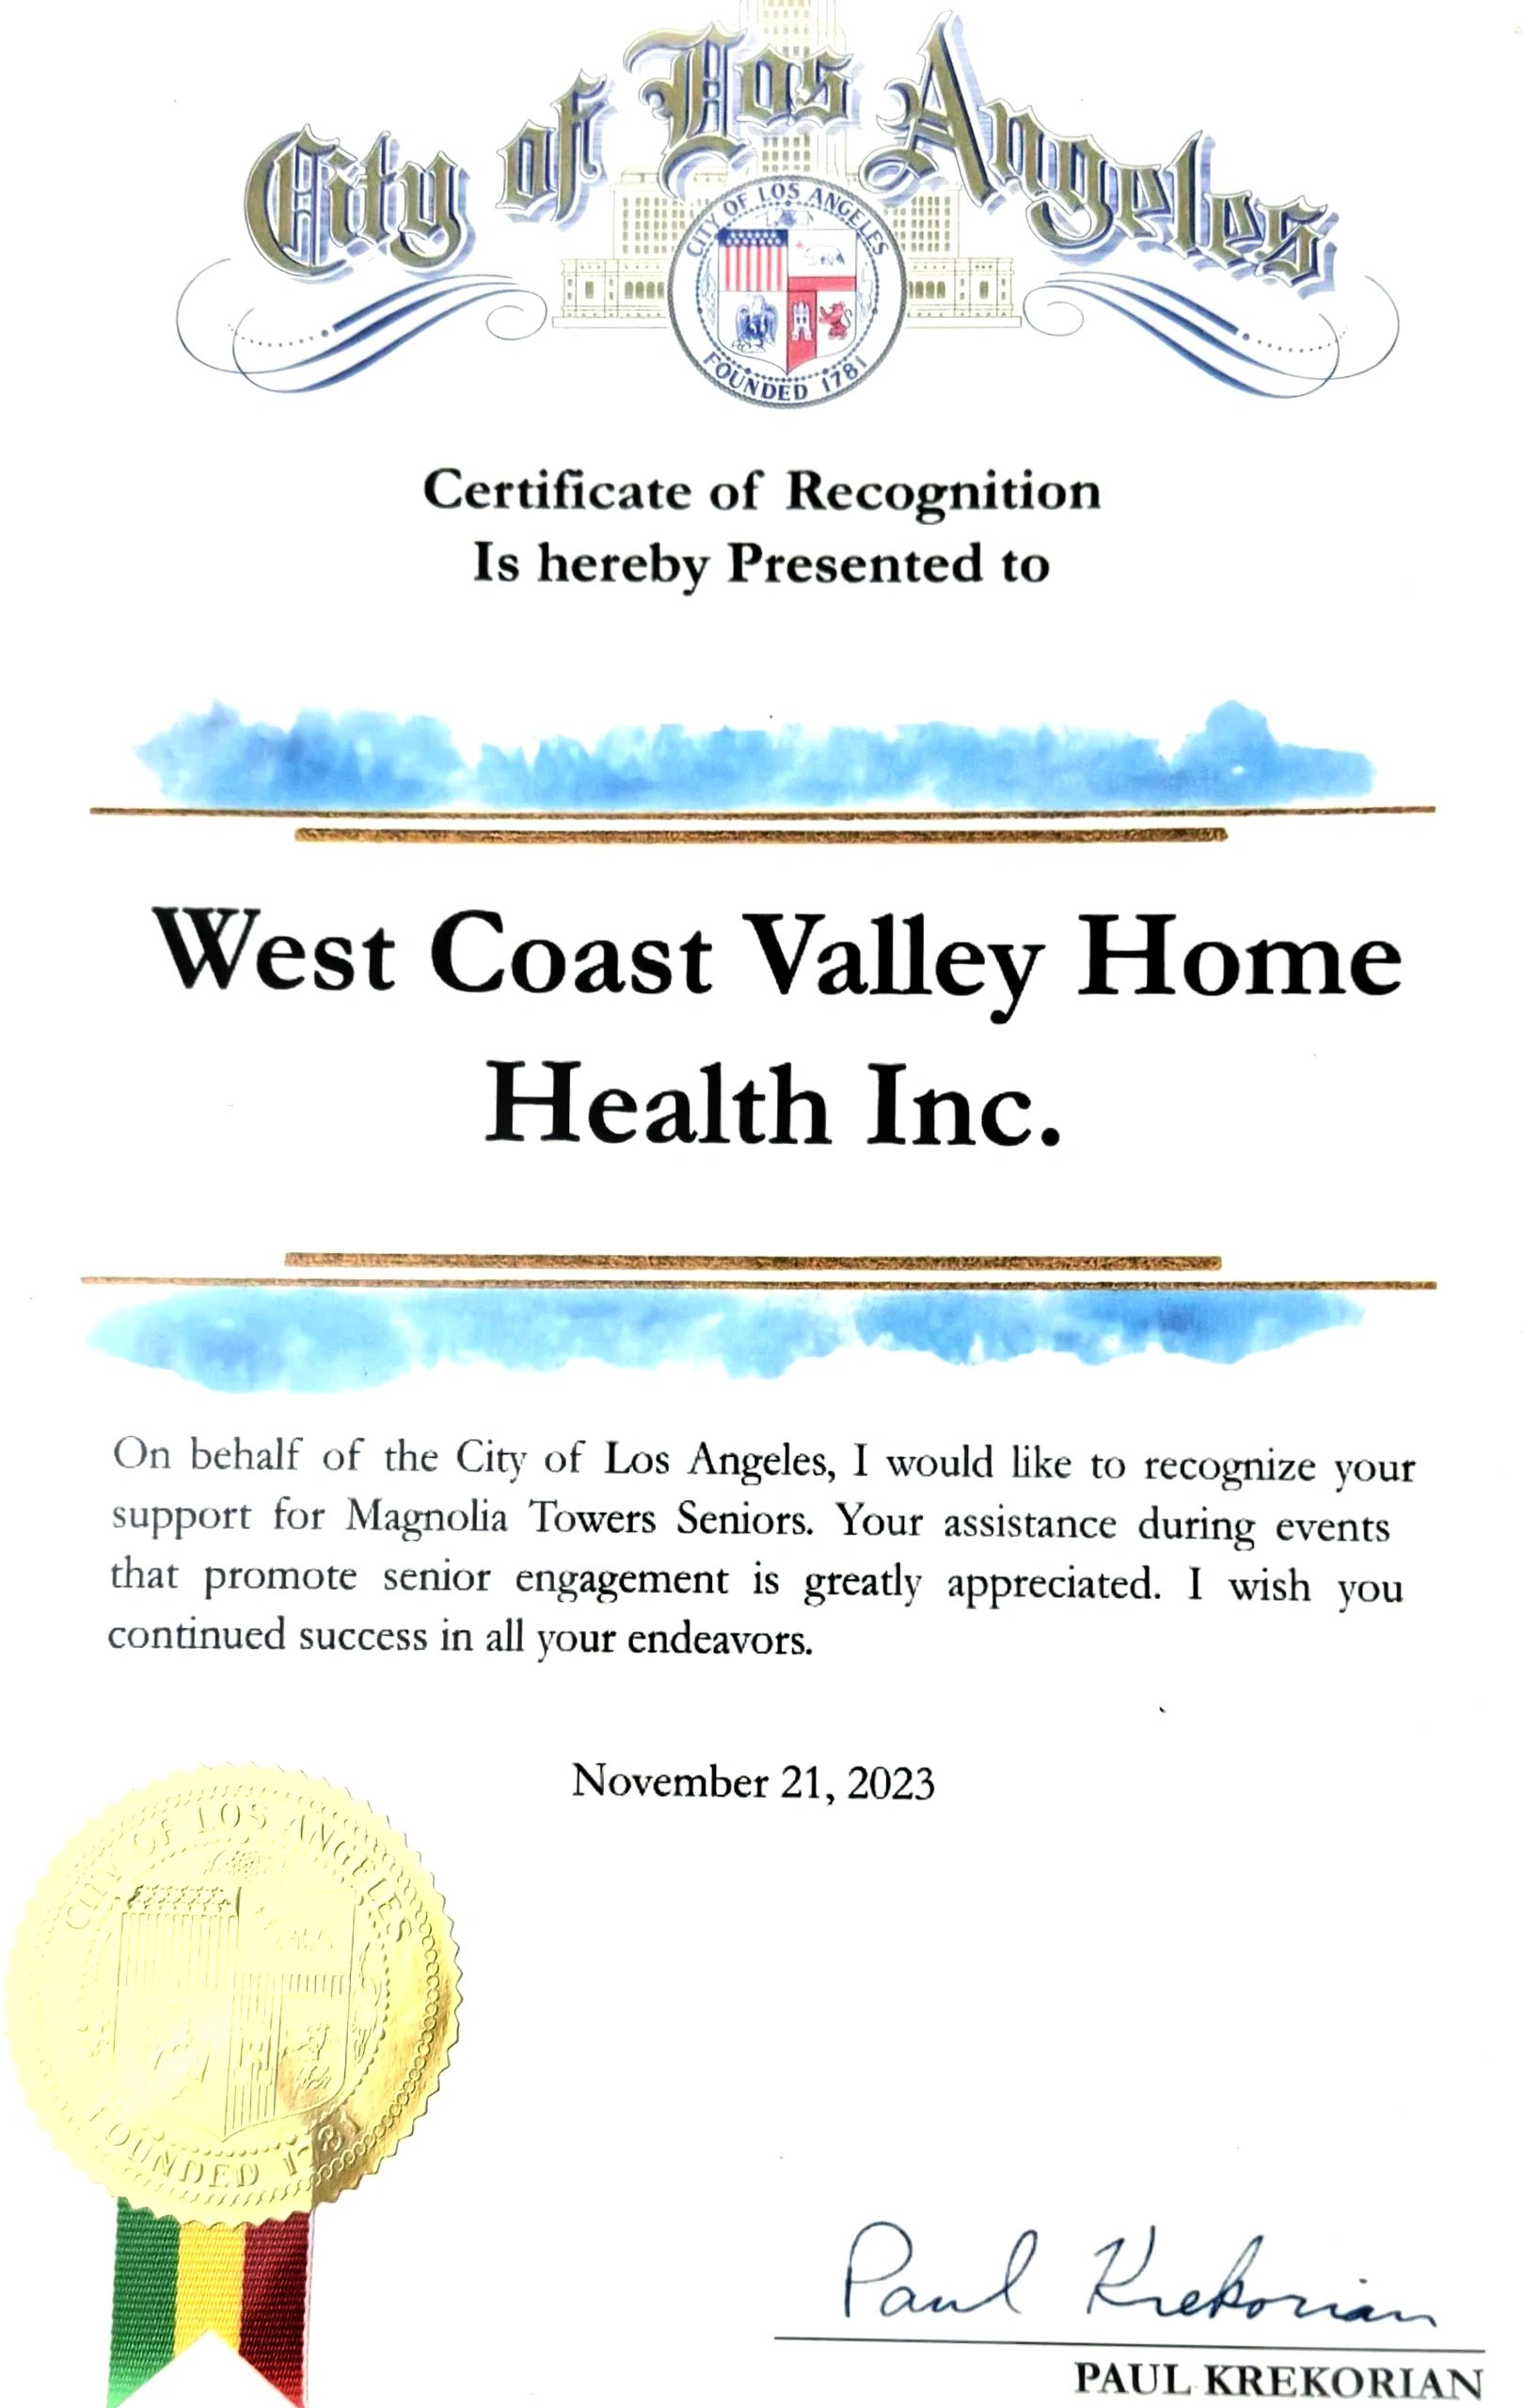 WCVHH Participation at an Event of Magnolia Towers Senior Living Community was Honored by City of LA